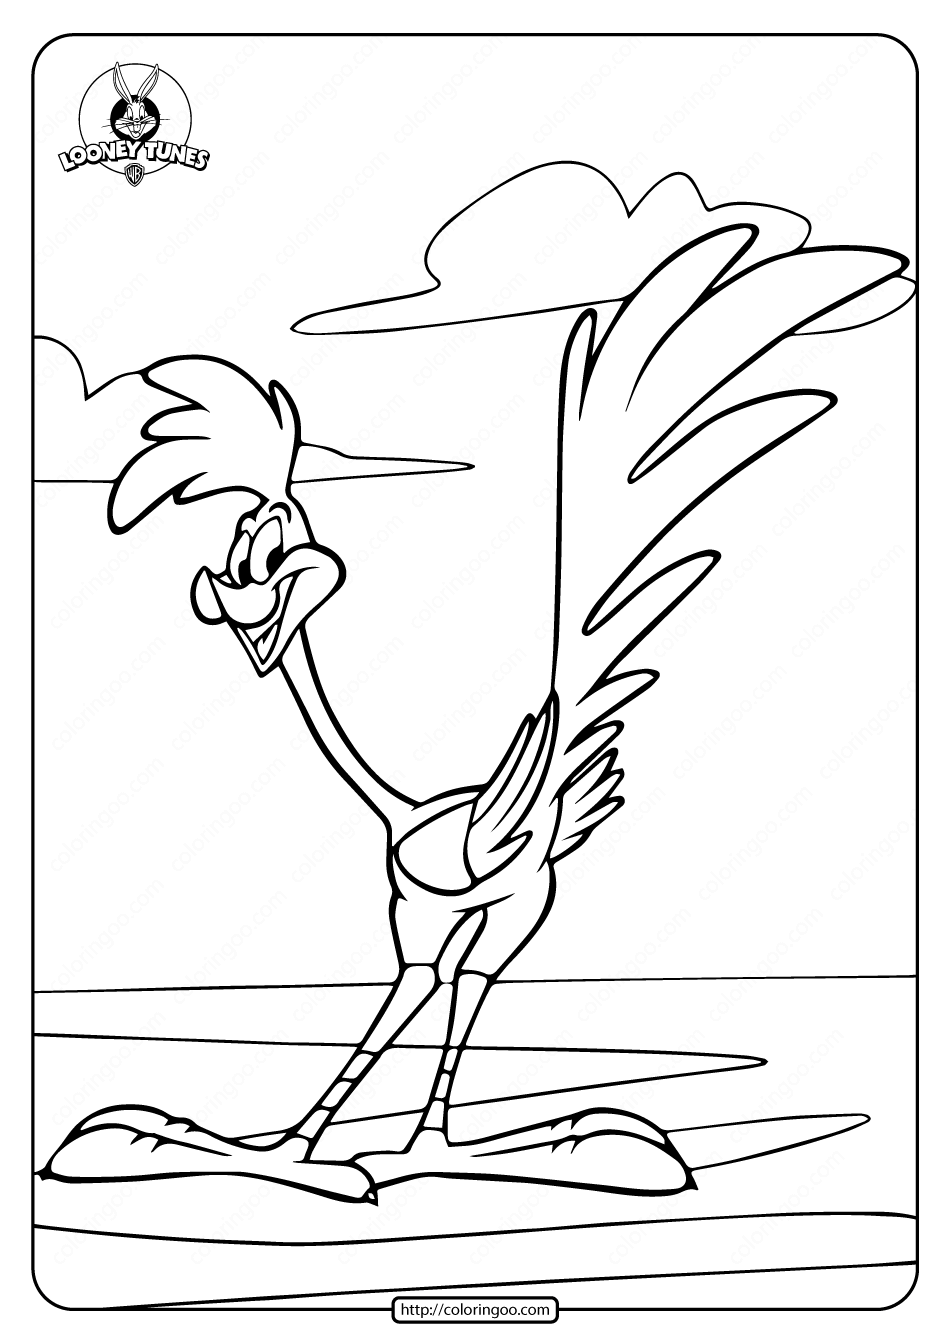 looney tunes road runner coloring page